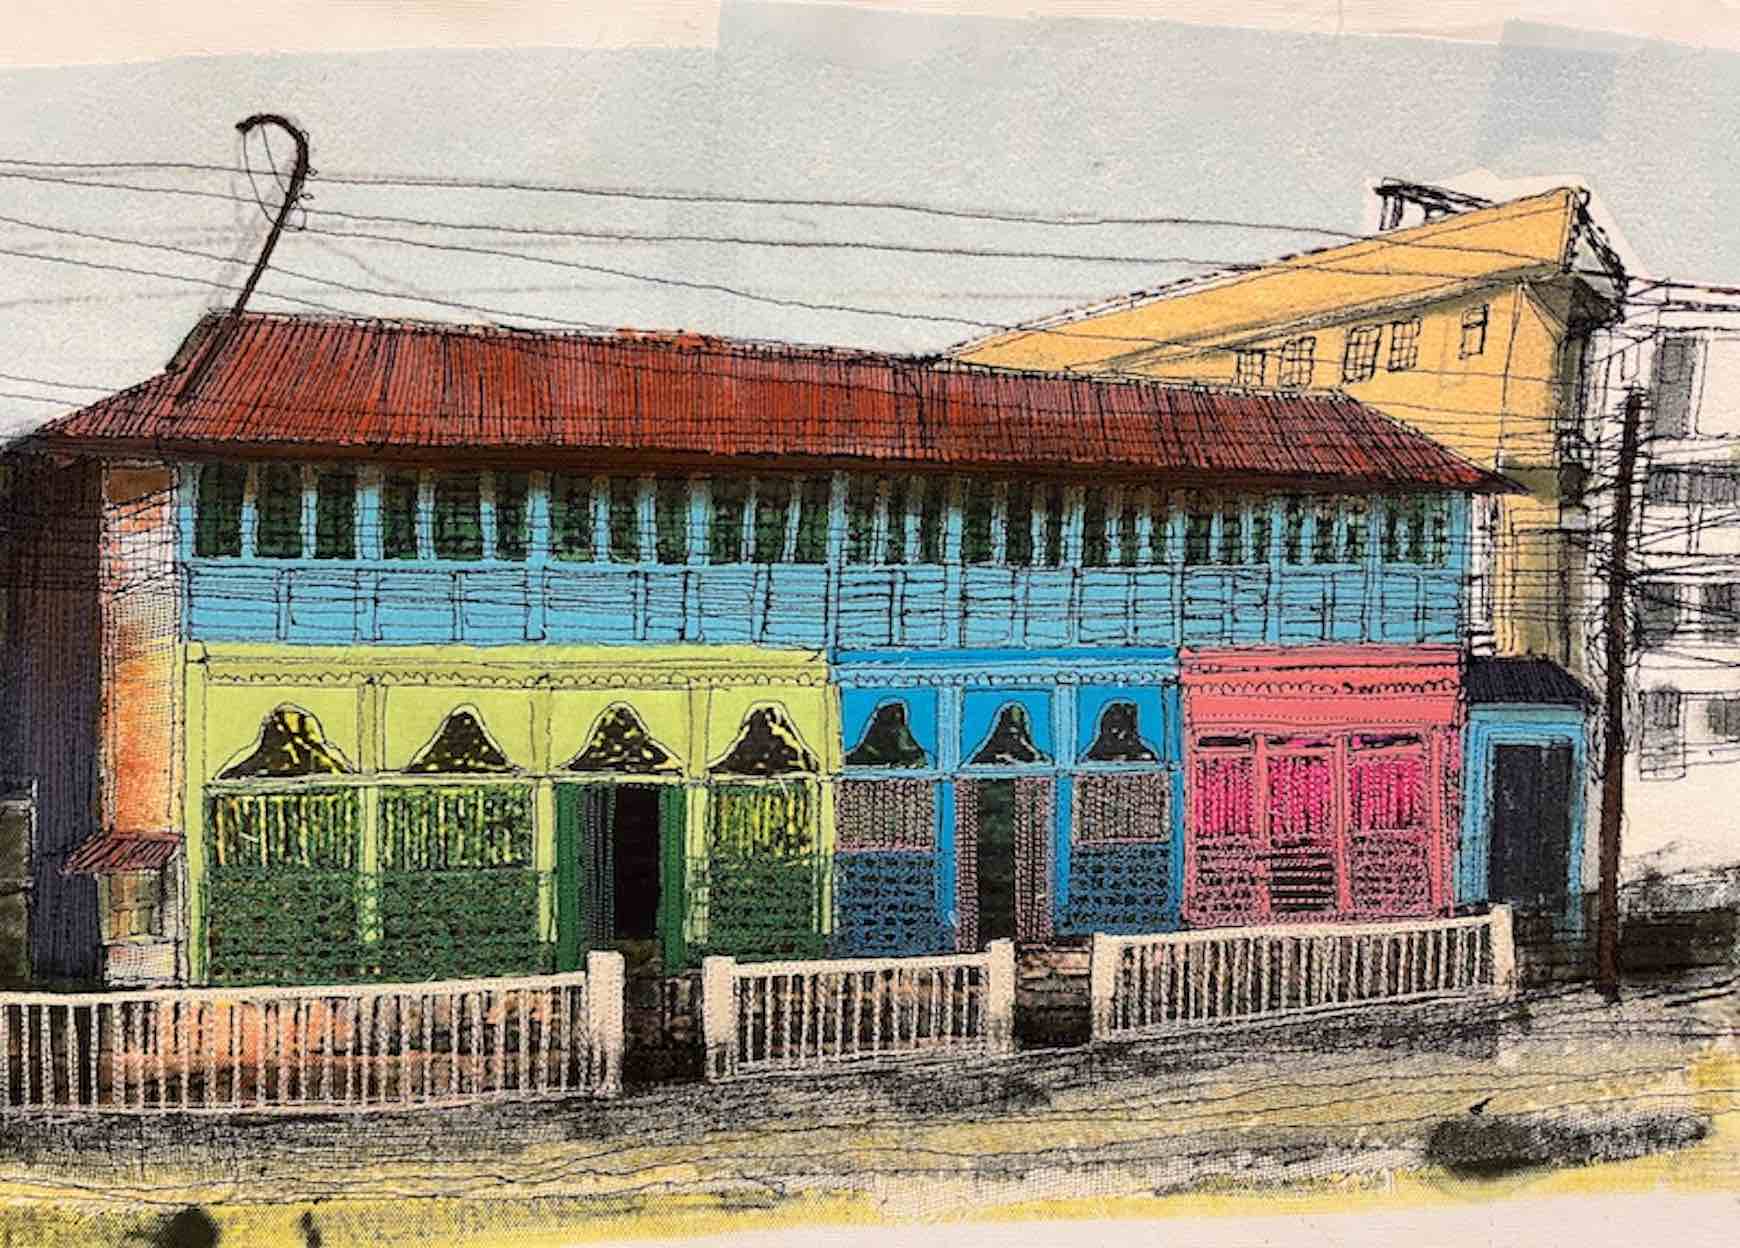 A textile painting by artist Cefyn Burgess showing a warehouse building in the Shillong Province, North East India.